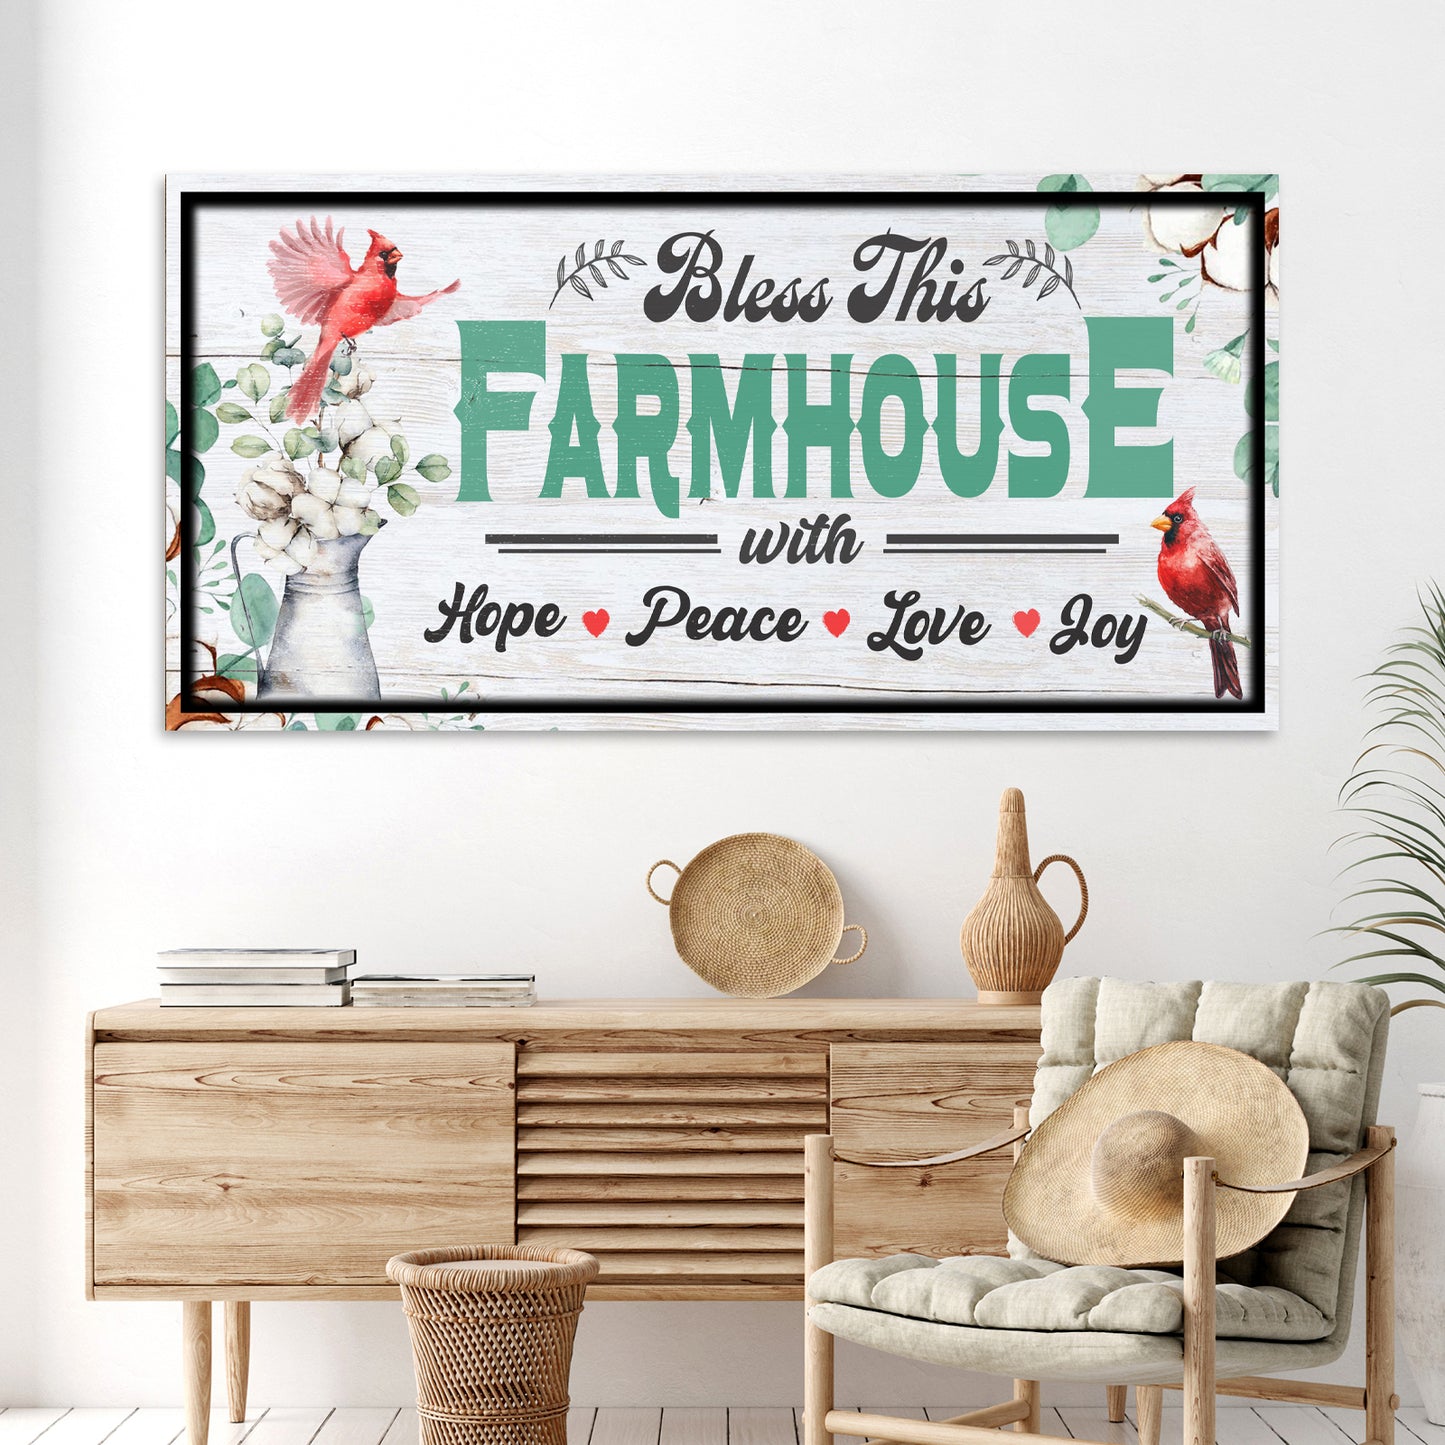 Bless this Farmhouse with Hope, Peace, Love, Joy (Ready to hang) - Wall Art Image by Tailored Canvases